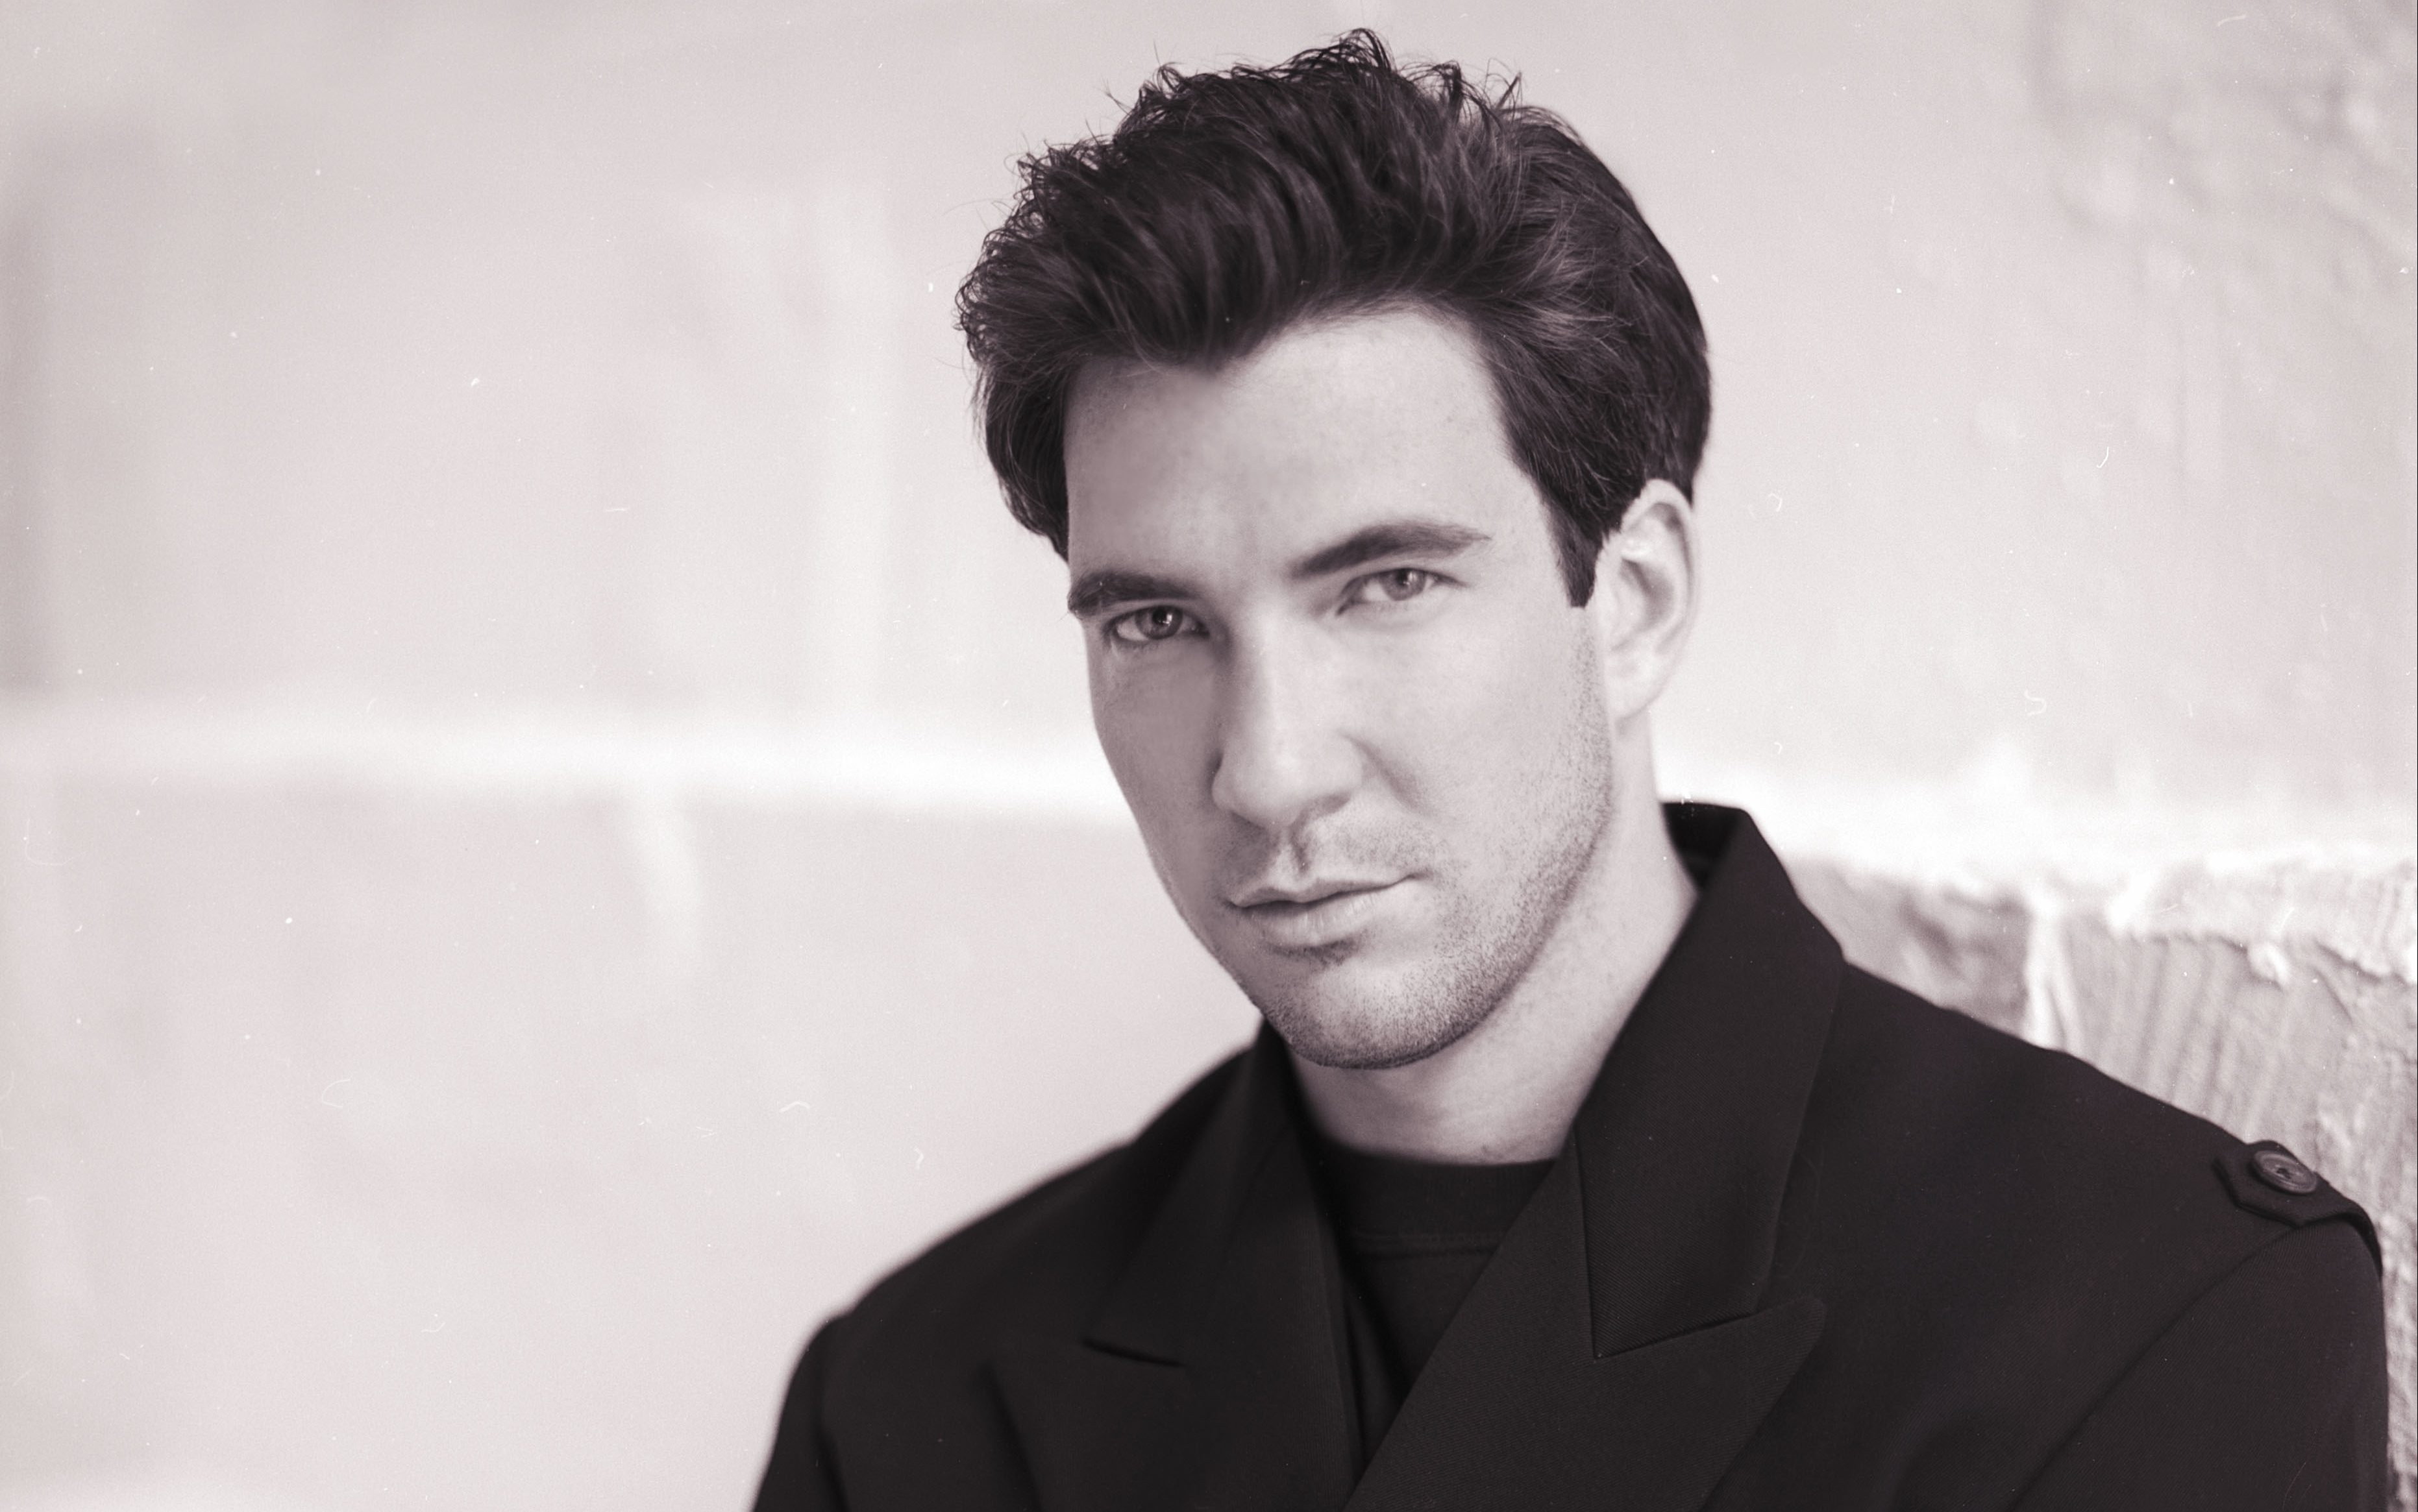 Dylan McDermott, 1986, actor in movies and TV shows